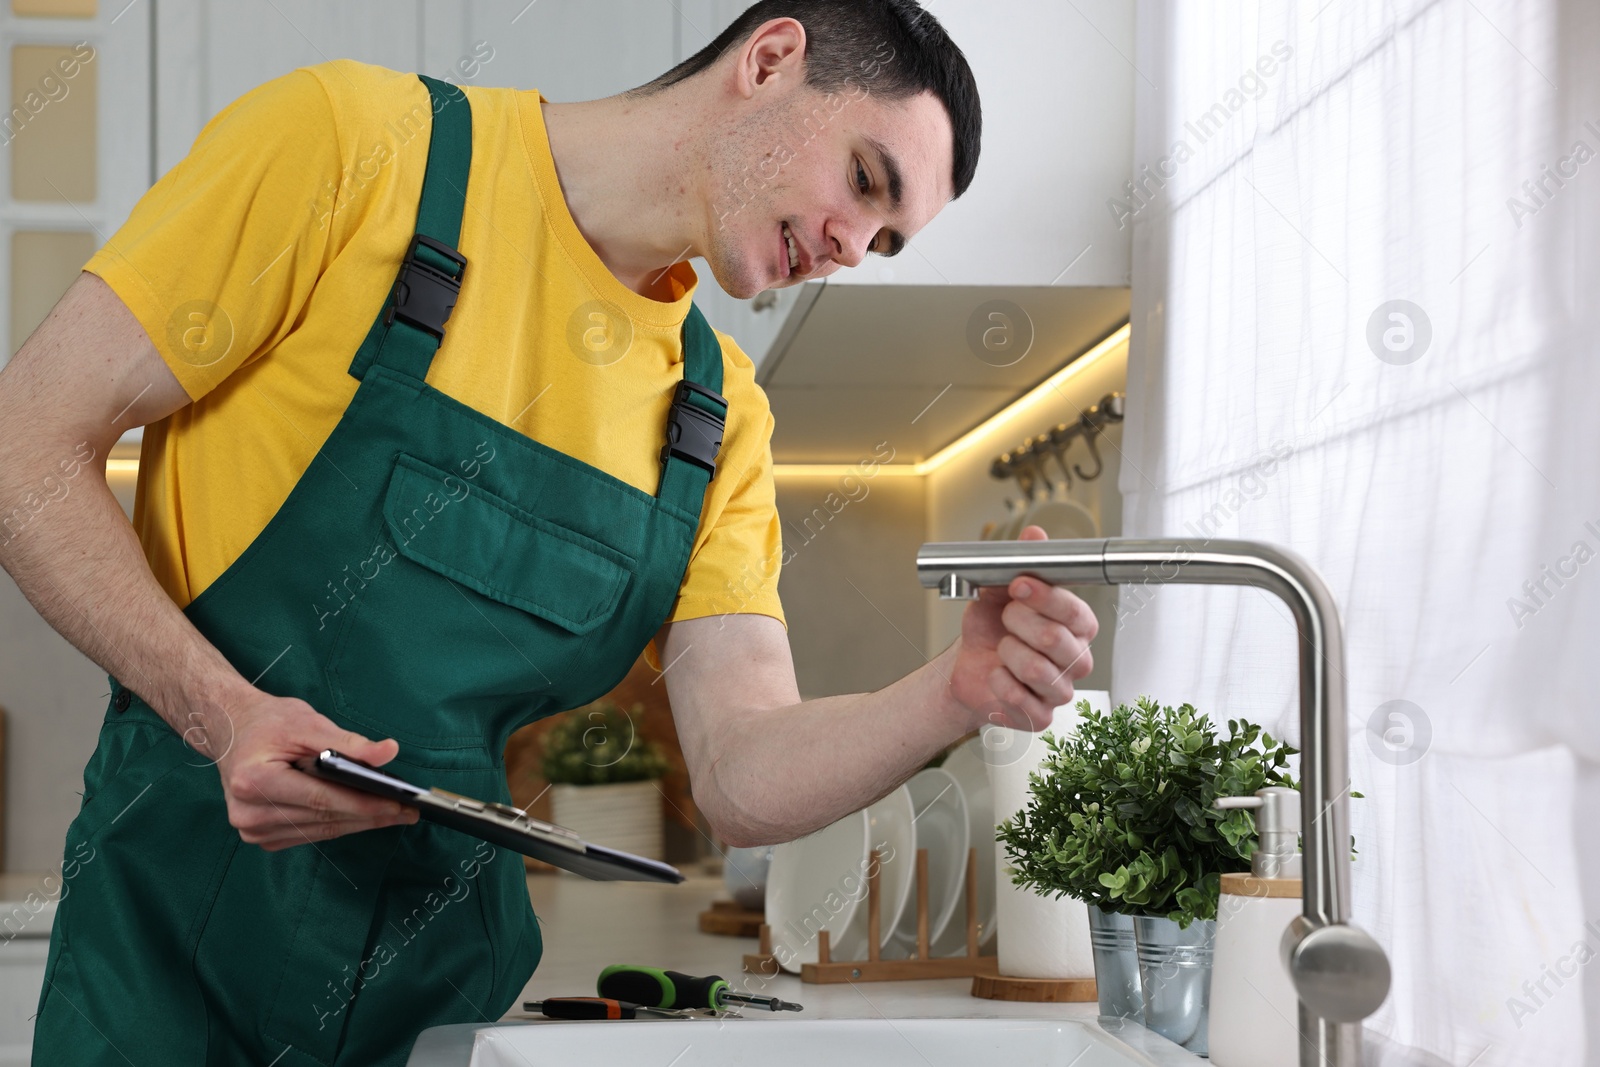 Photo of Smiling plumber with clipboard examining faucet in kitchen